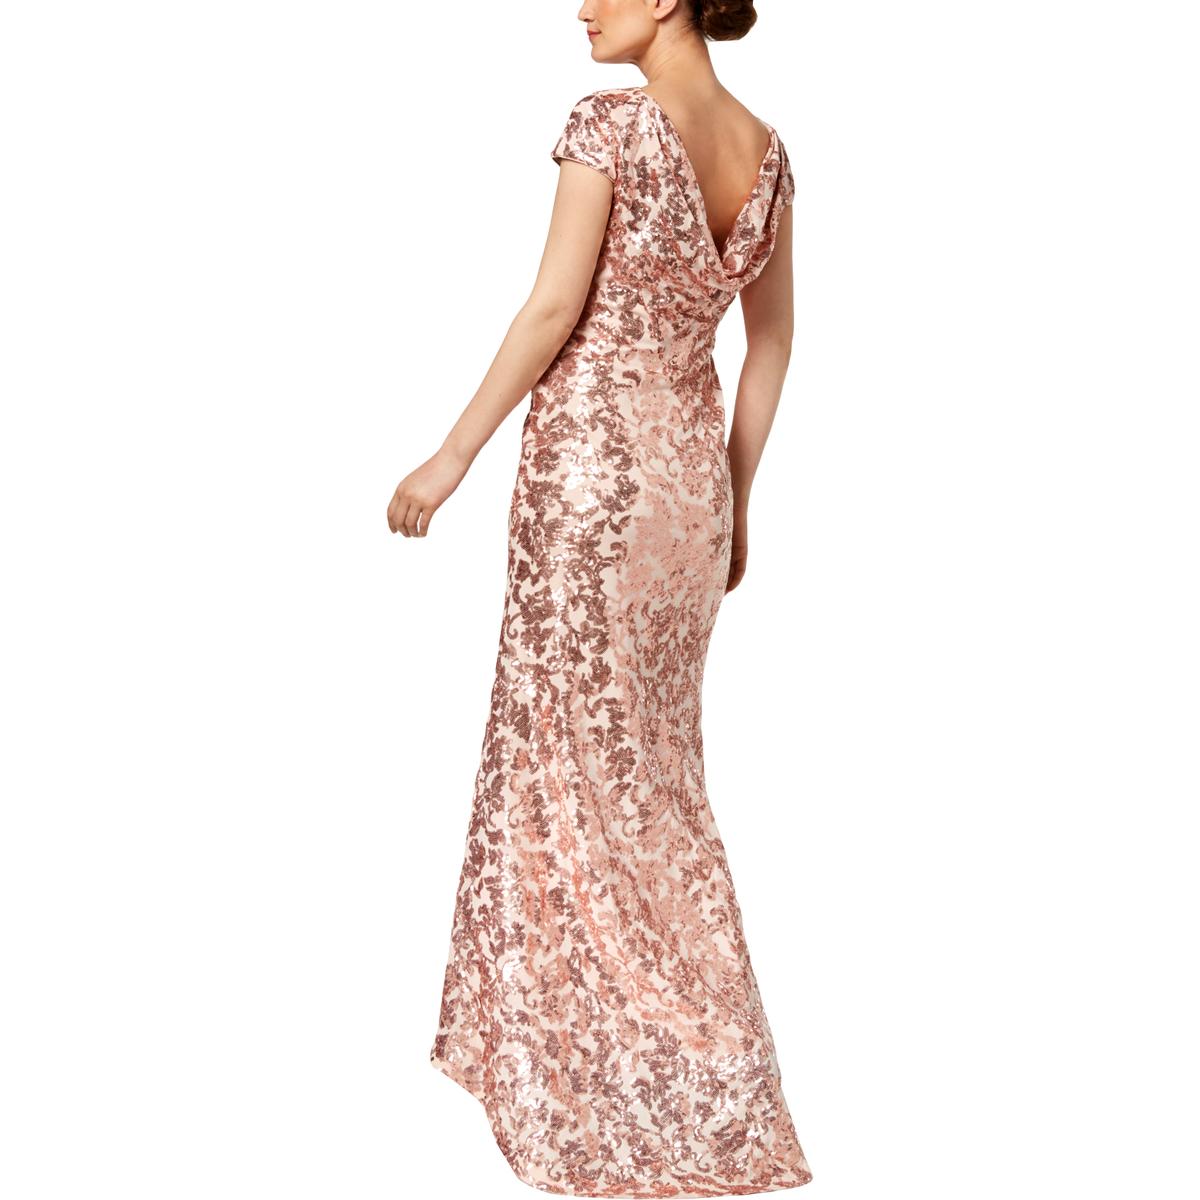 Calvin Klein Womens Pink Draped-Back Sequined Evening Dress Gown 8 BHFO ...